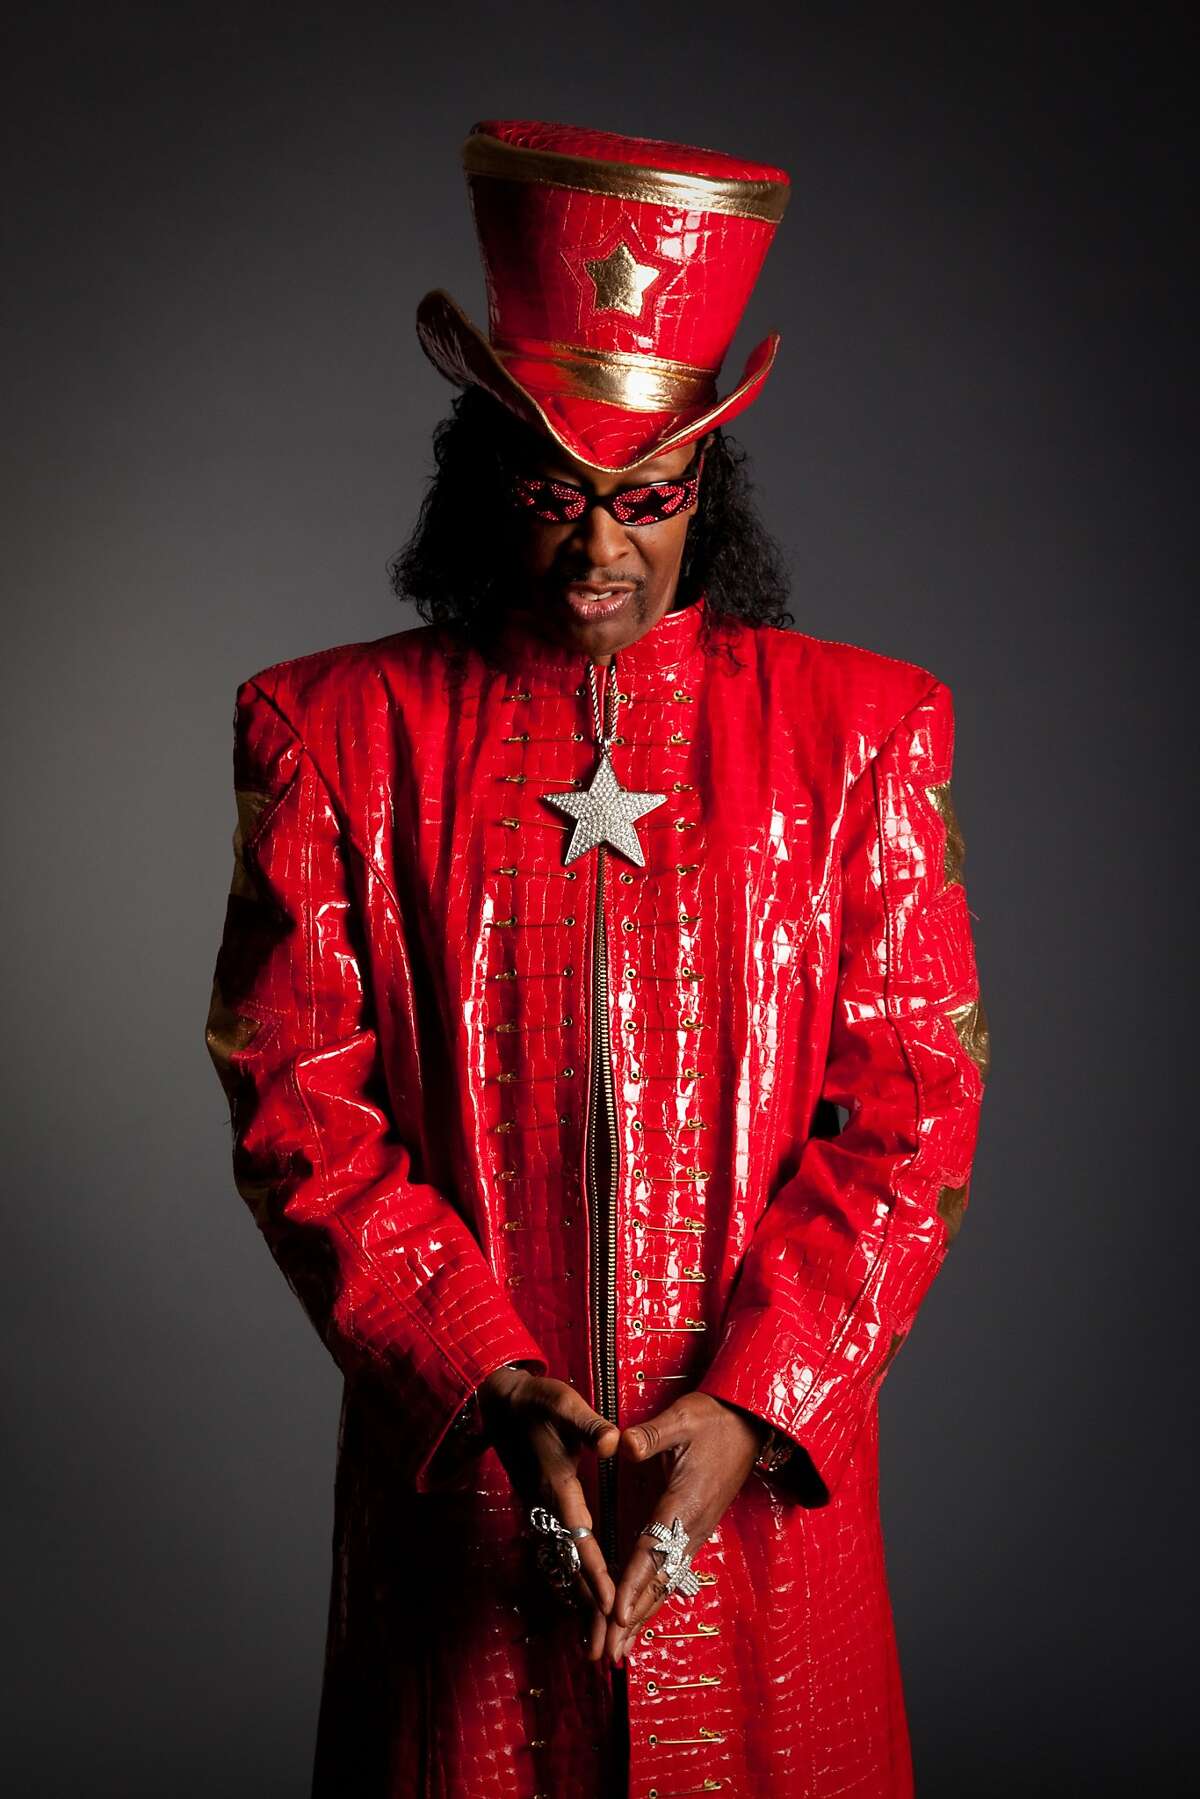 Bootsy Collins performs on Friday as part of the San Jose Jazz Summer Fest.